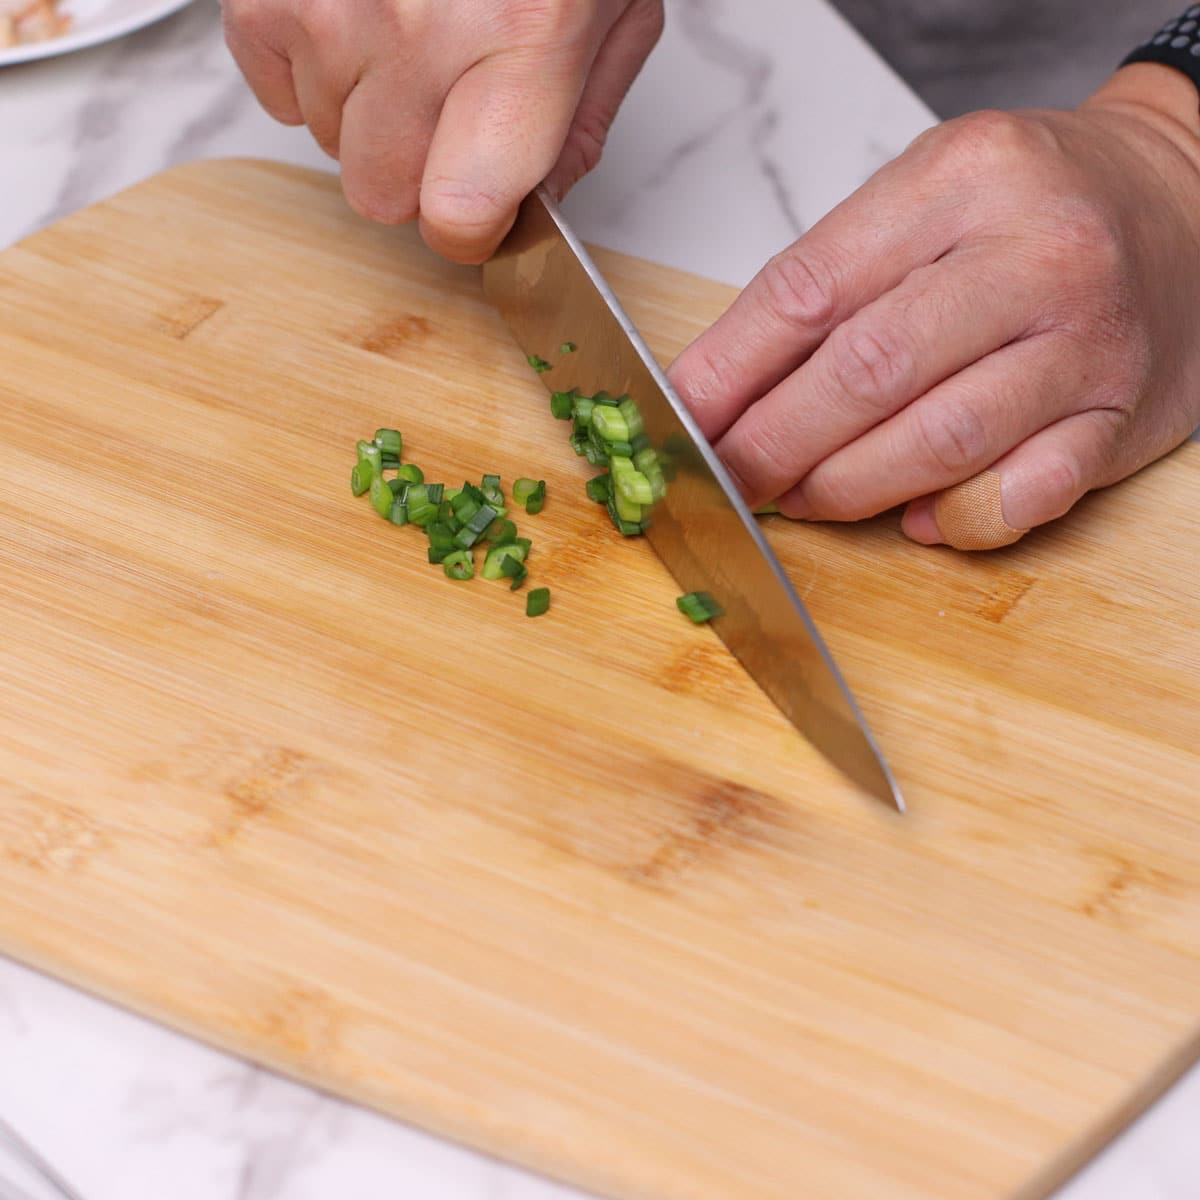 Step 2: Slicing spring onions on a chopping board.